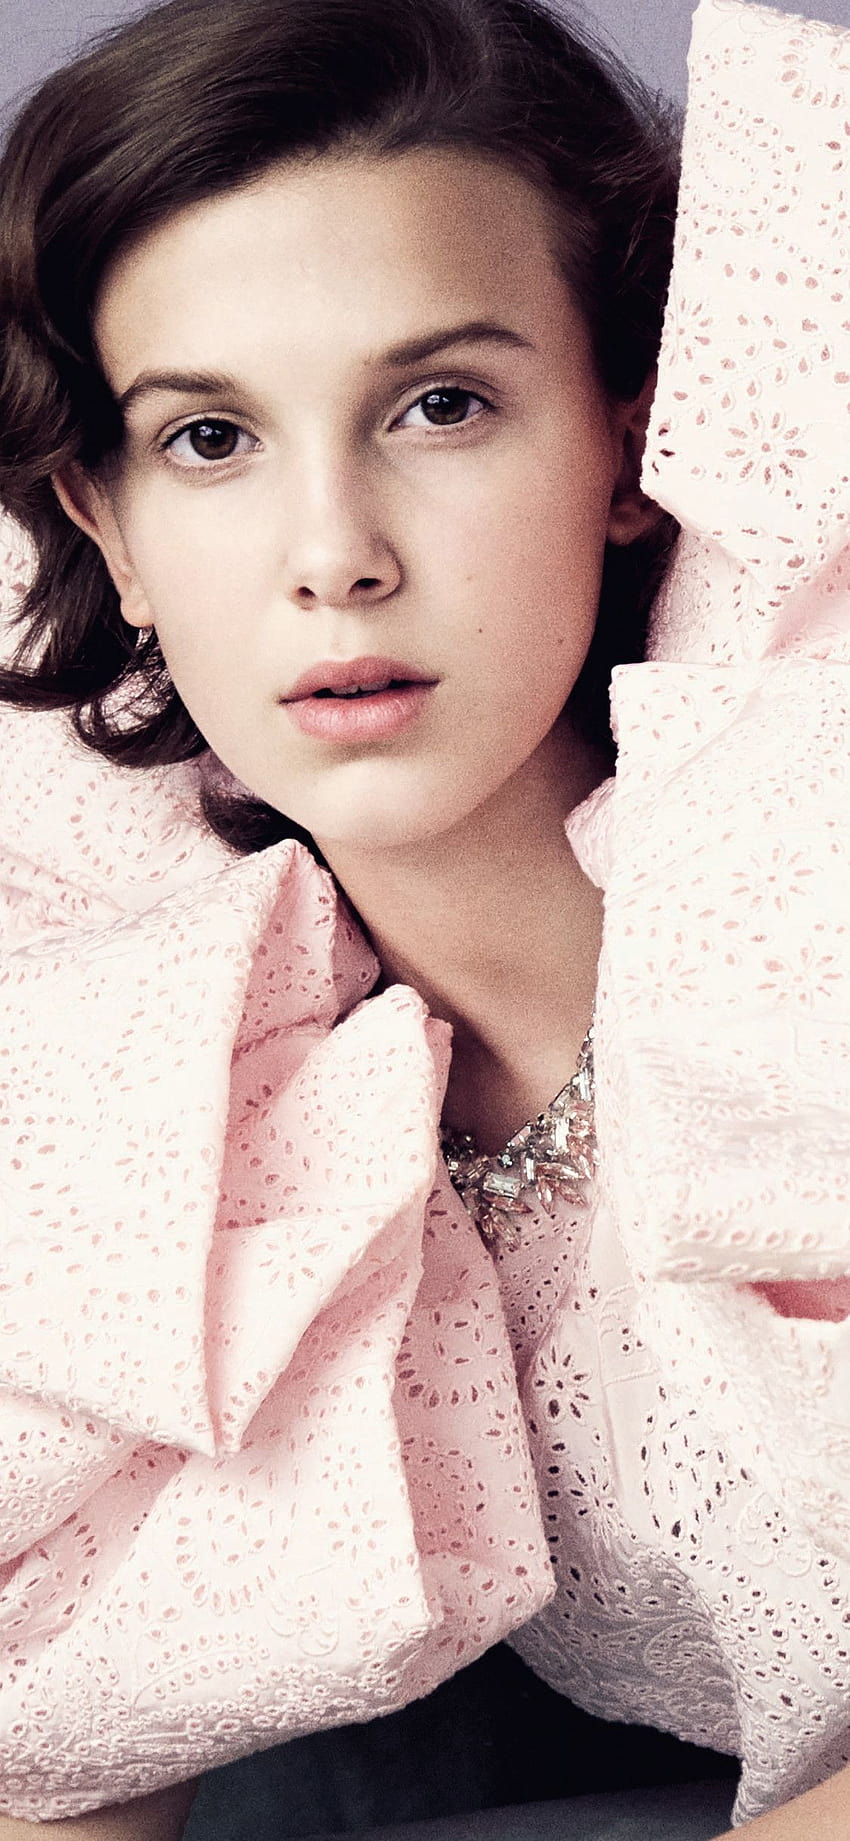 1125x2436 Millie Bobby Brown Vogue 2018 Iphone XS,Iphone 10,Iphone, millie bobby brown iphone HD phone wallpaper